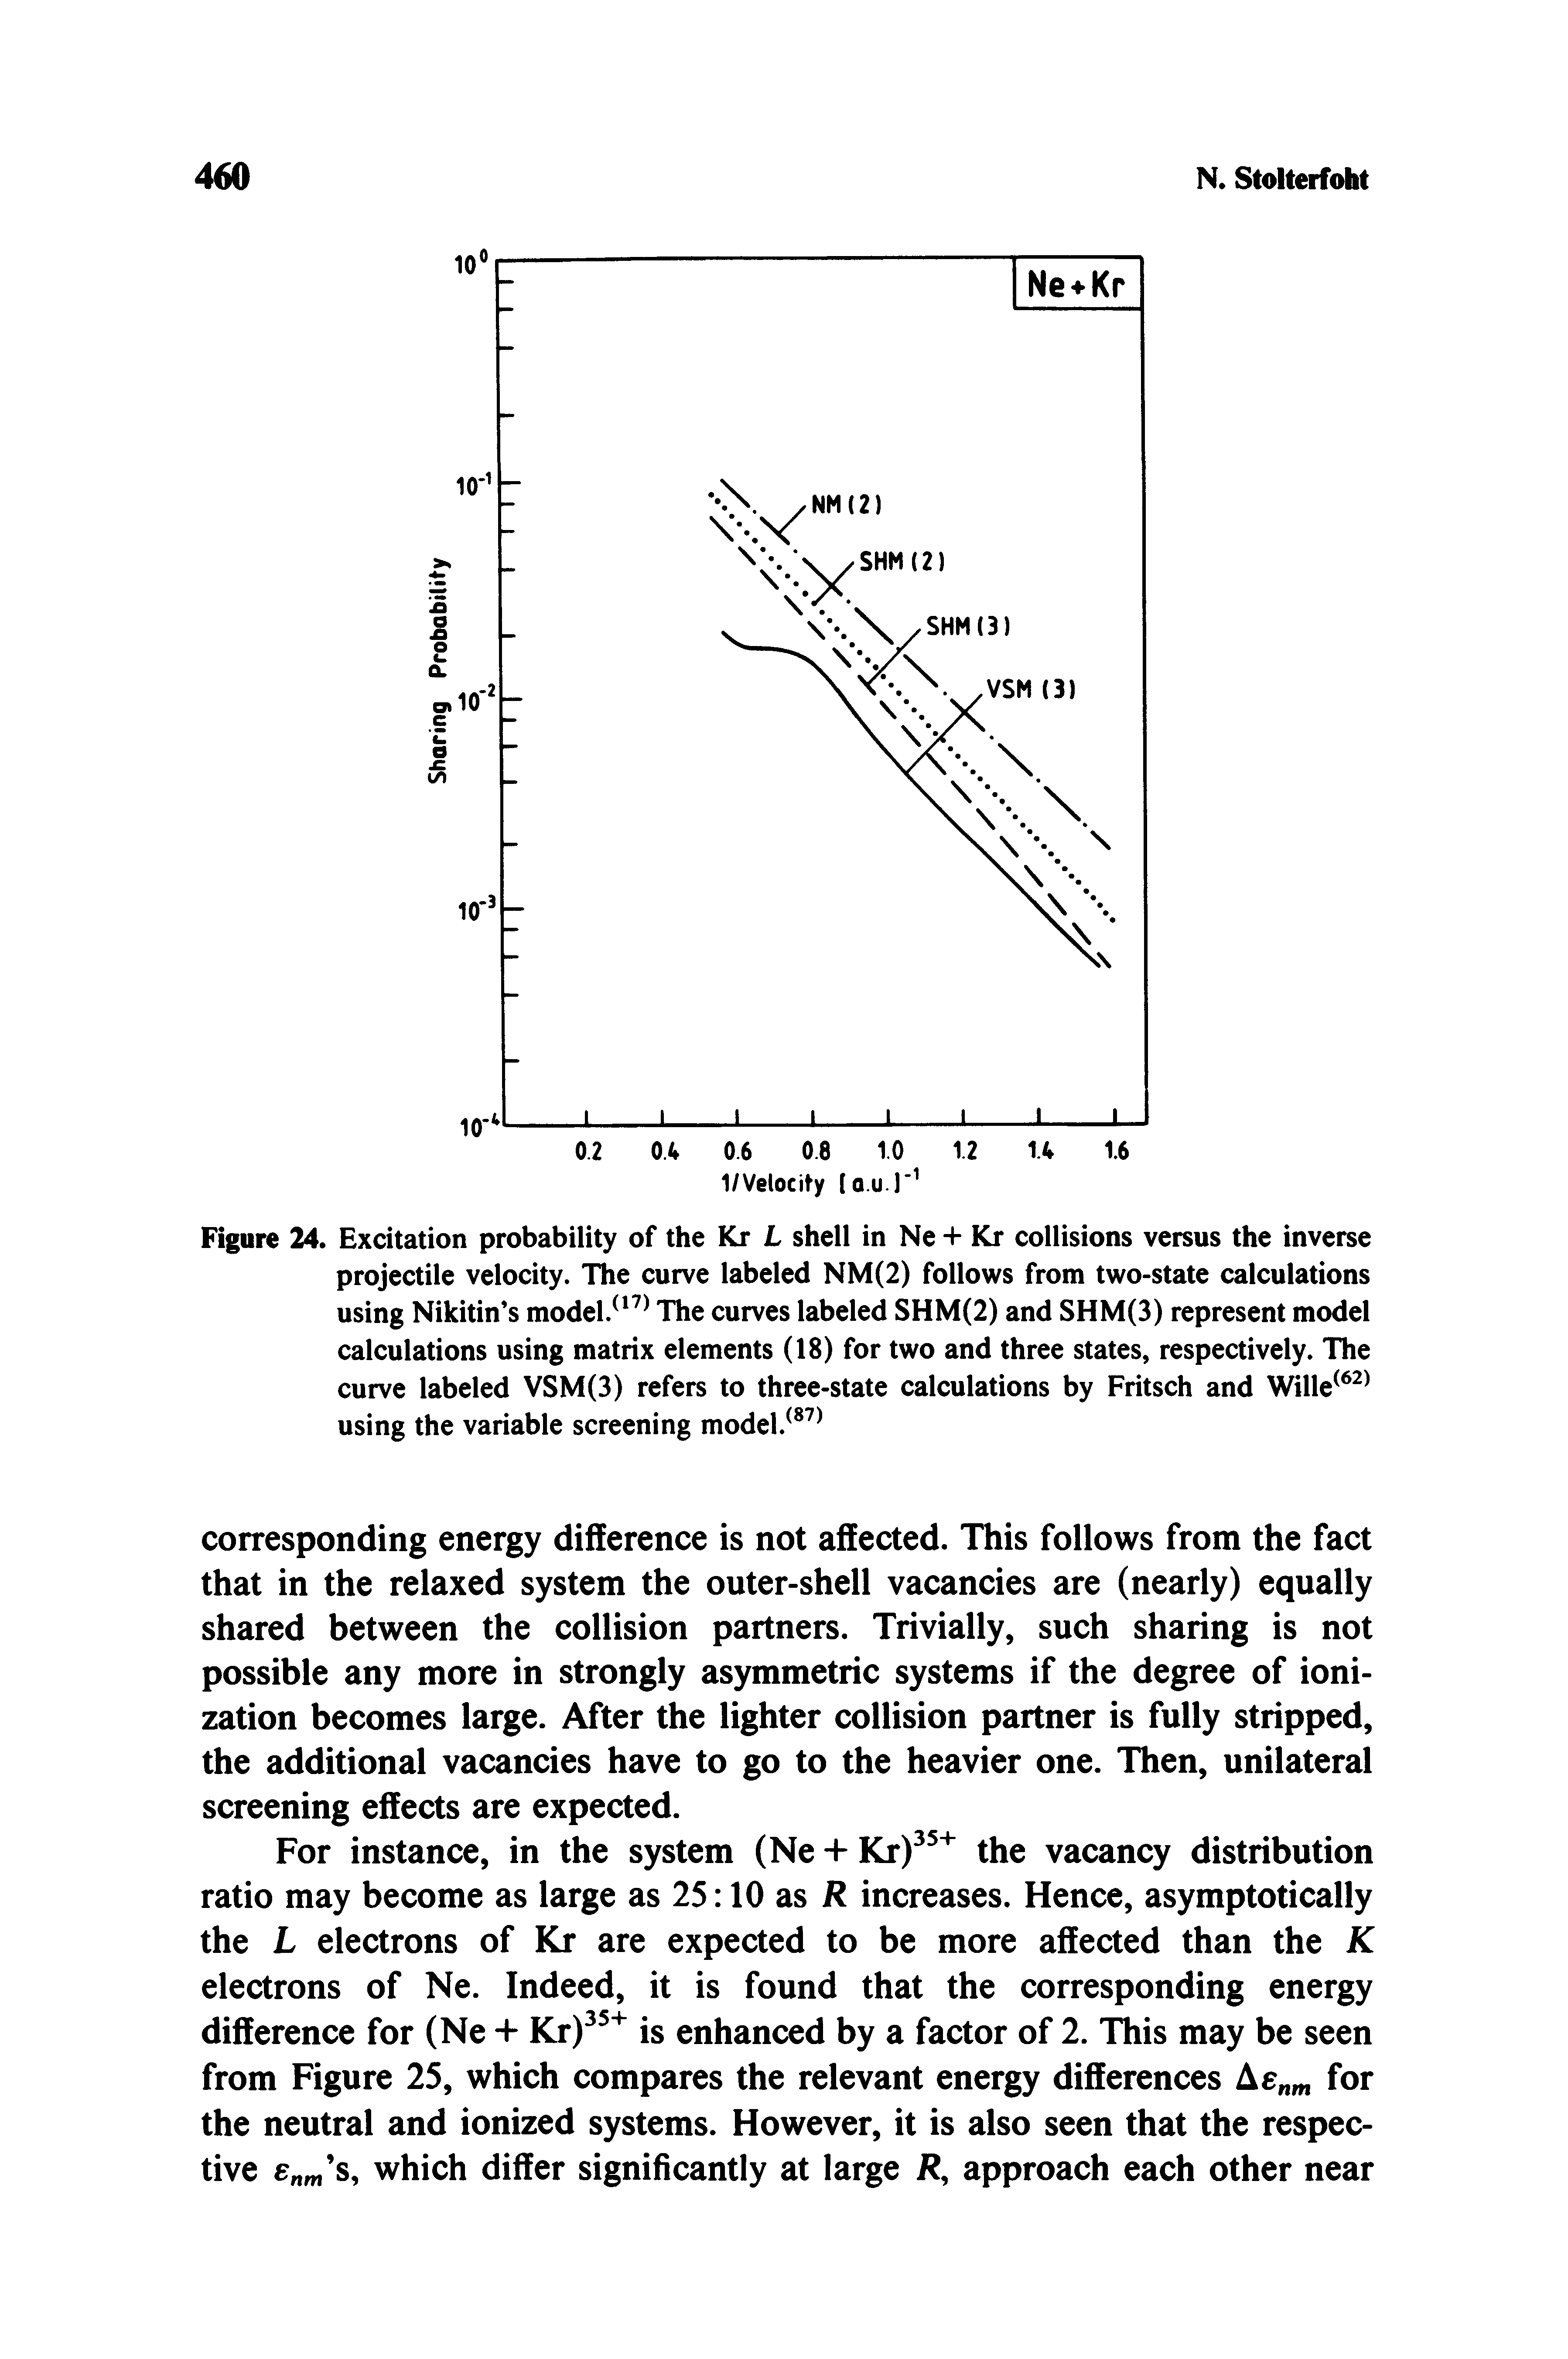 Figure 24. Excitation probability of the Kx L shell in Ne + Kr collisions versus the inverse projectile velocity. The curve labeled NM(2) follows from two-state calculations using Nikitin s model. The curves labeled SHM(2) and SHM(3) represent model calculations using matrix elements (18) for two and three states, respectively. The curve labeled VSM(3) refers to three-state calculations by Fritsch and Wille using the variable screening model. ...